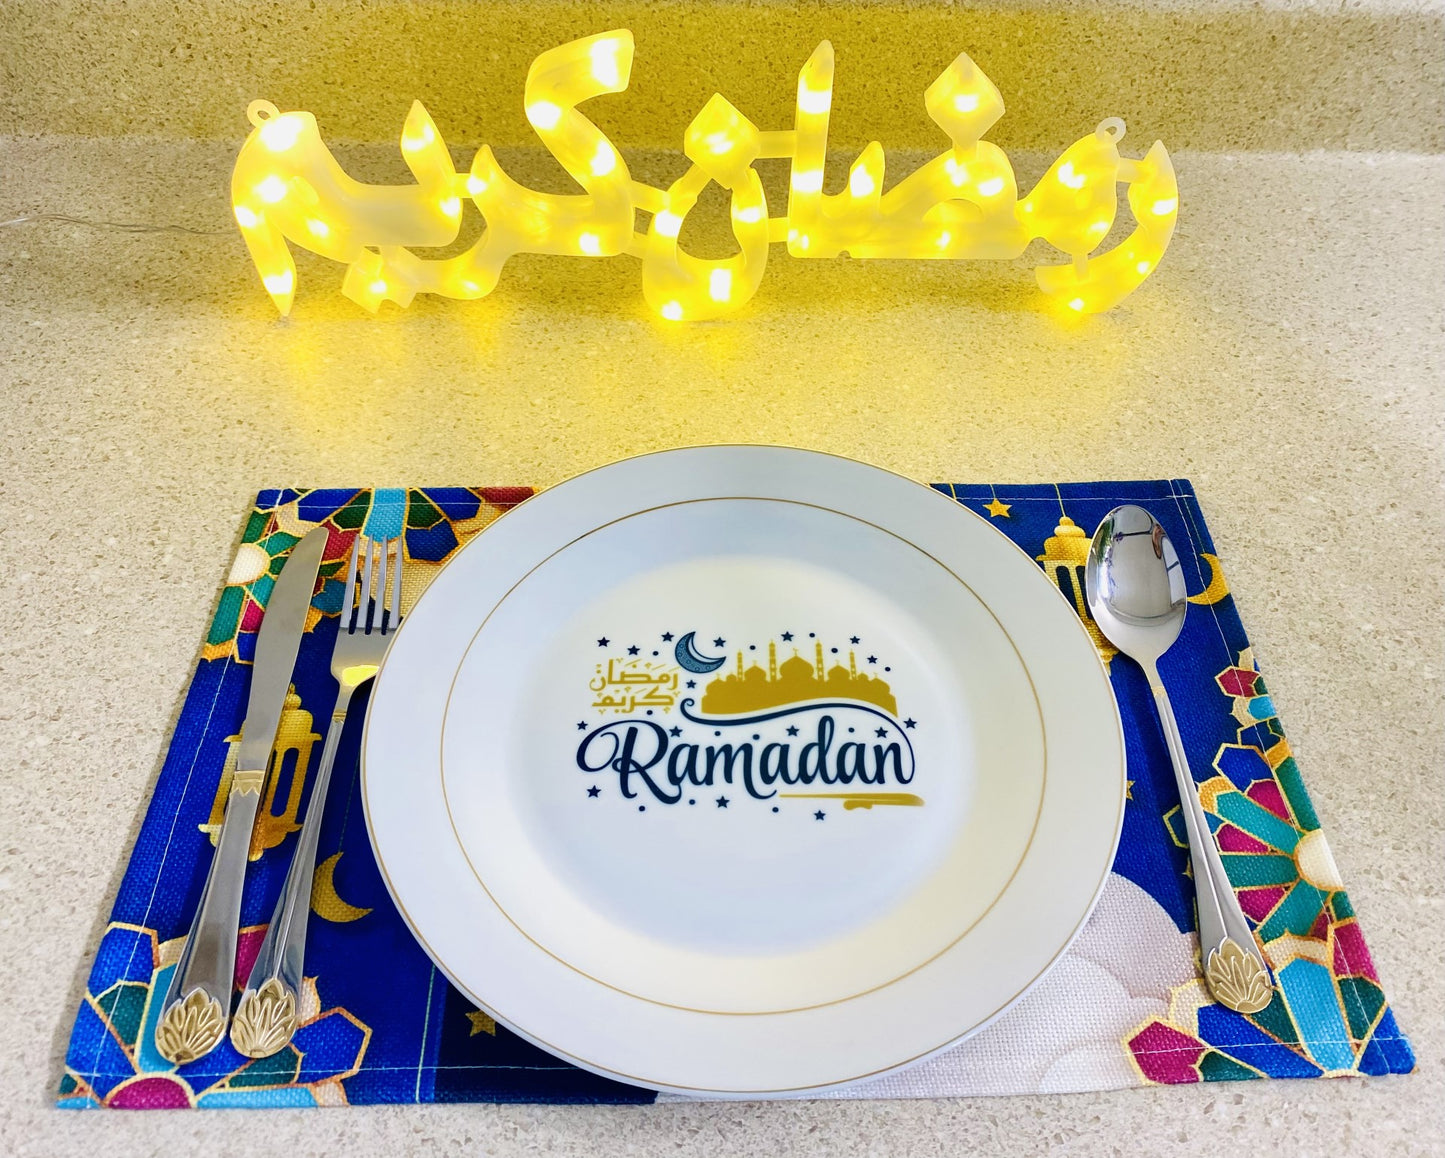 Blessings of Ramadan Gold-Trimmed Ceramic Iftar Plate